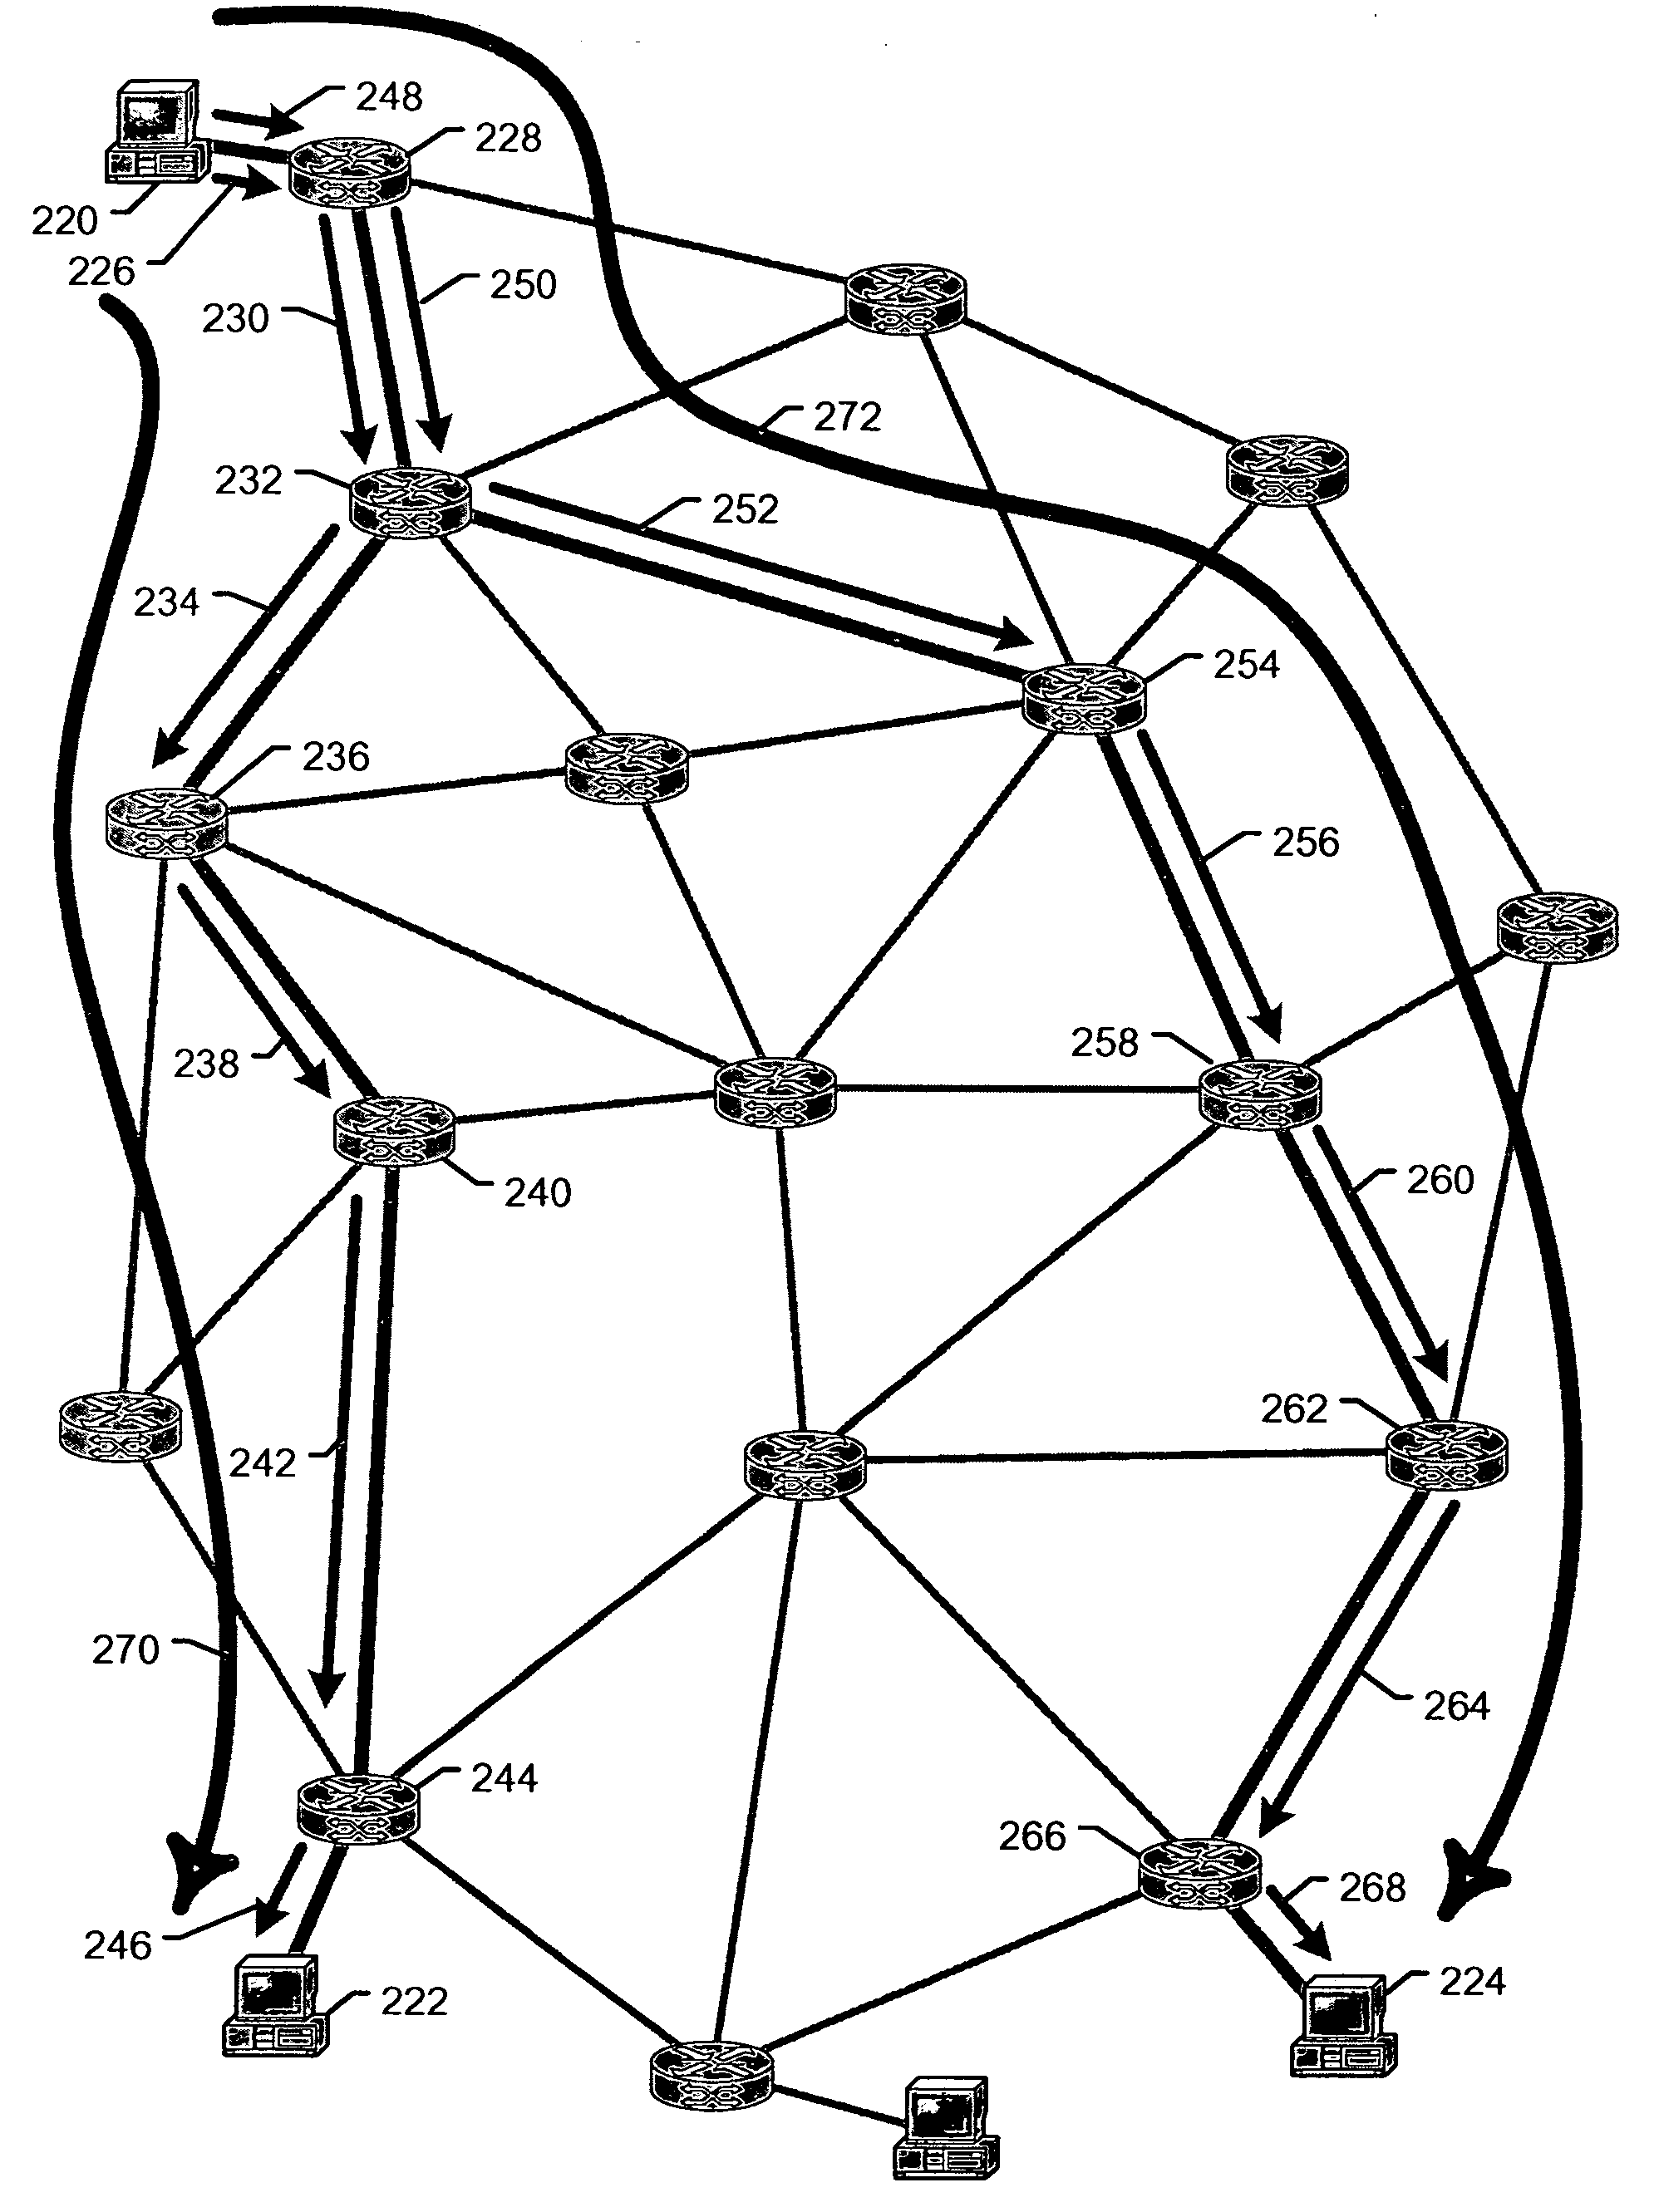 System and method of implementing contacts of small worlds in packet communication networks